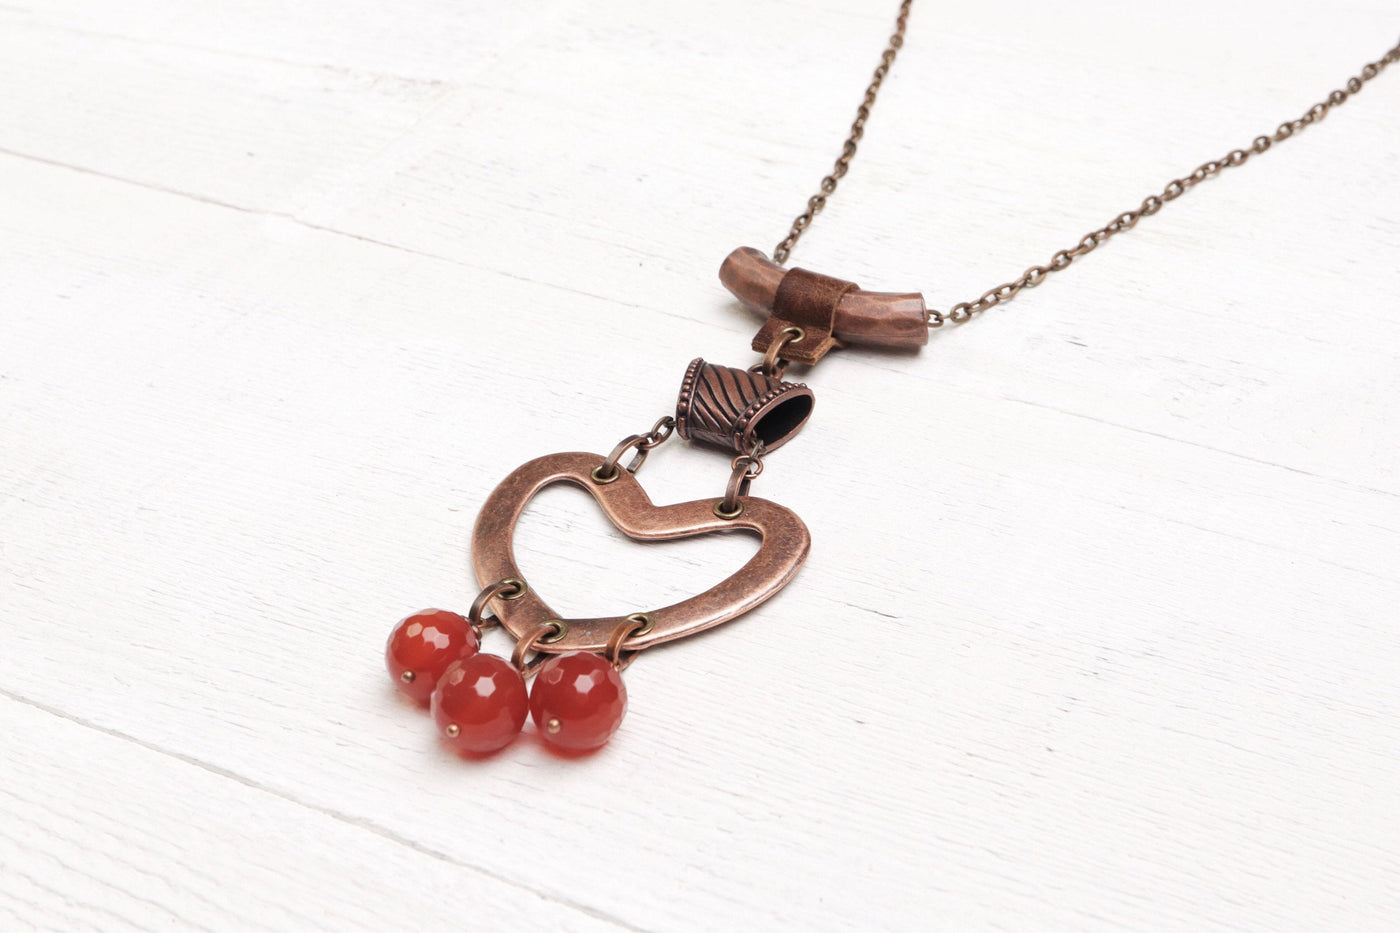 Agate Heart Boho Necklace - Long Carnelian Gypsy Bohemian Handmade Stone Pendant Valentine's Day Mother Wife Love Lover Gift For Her Jewelry